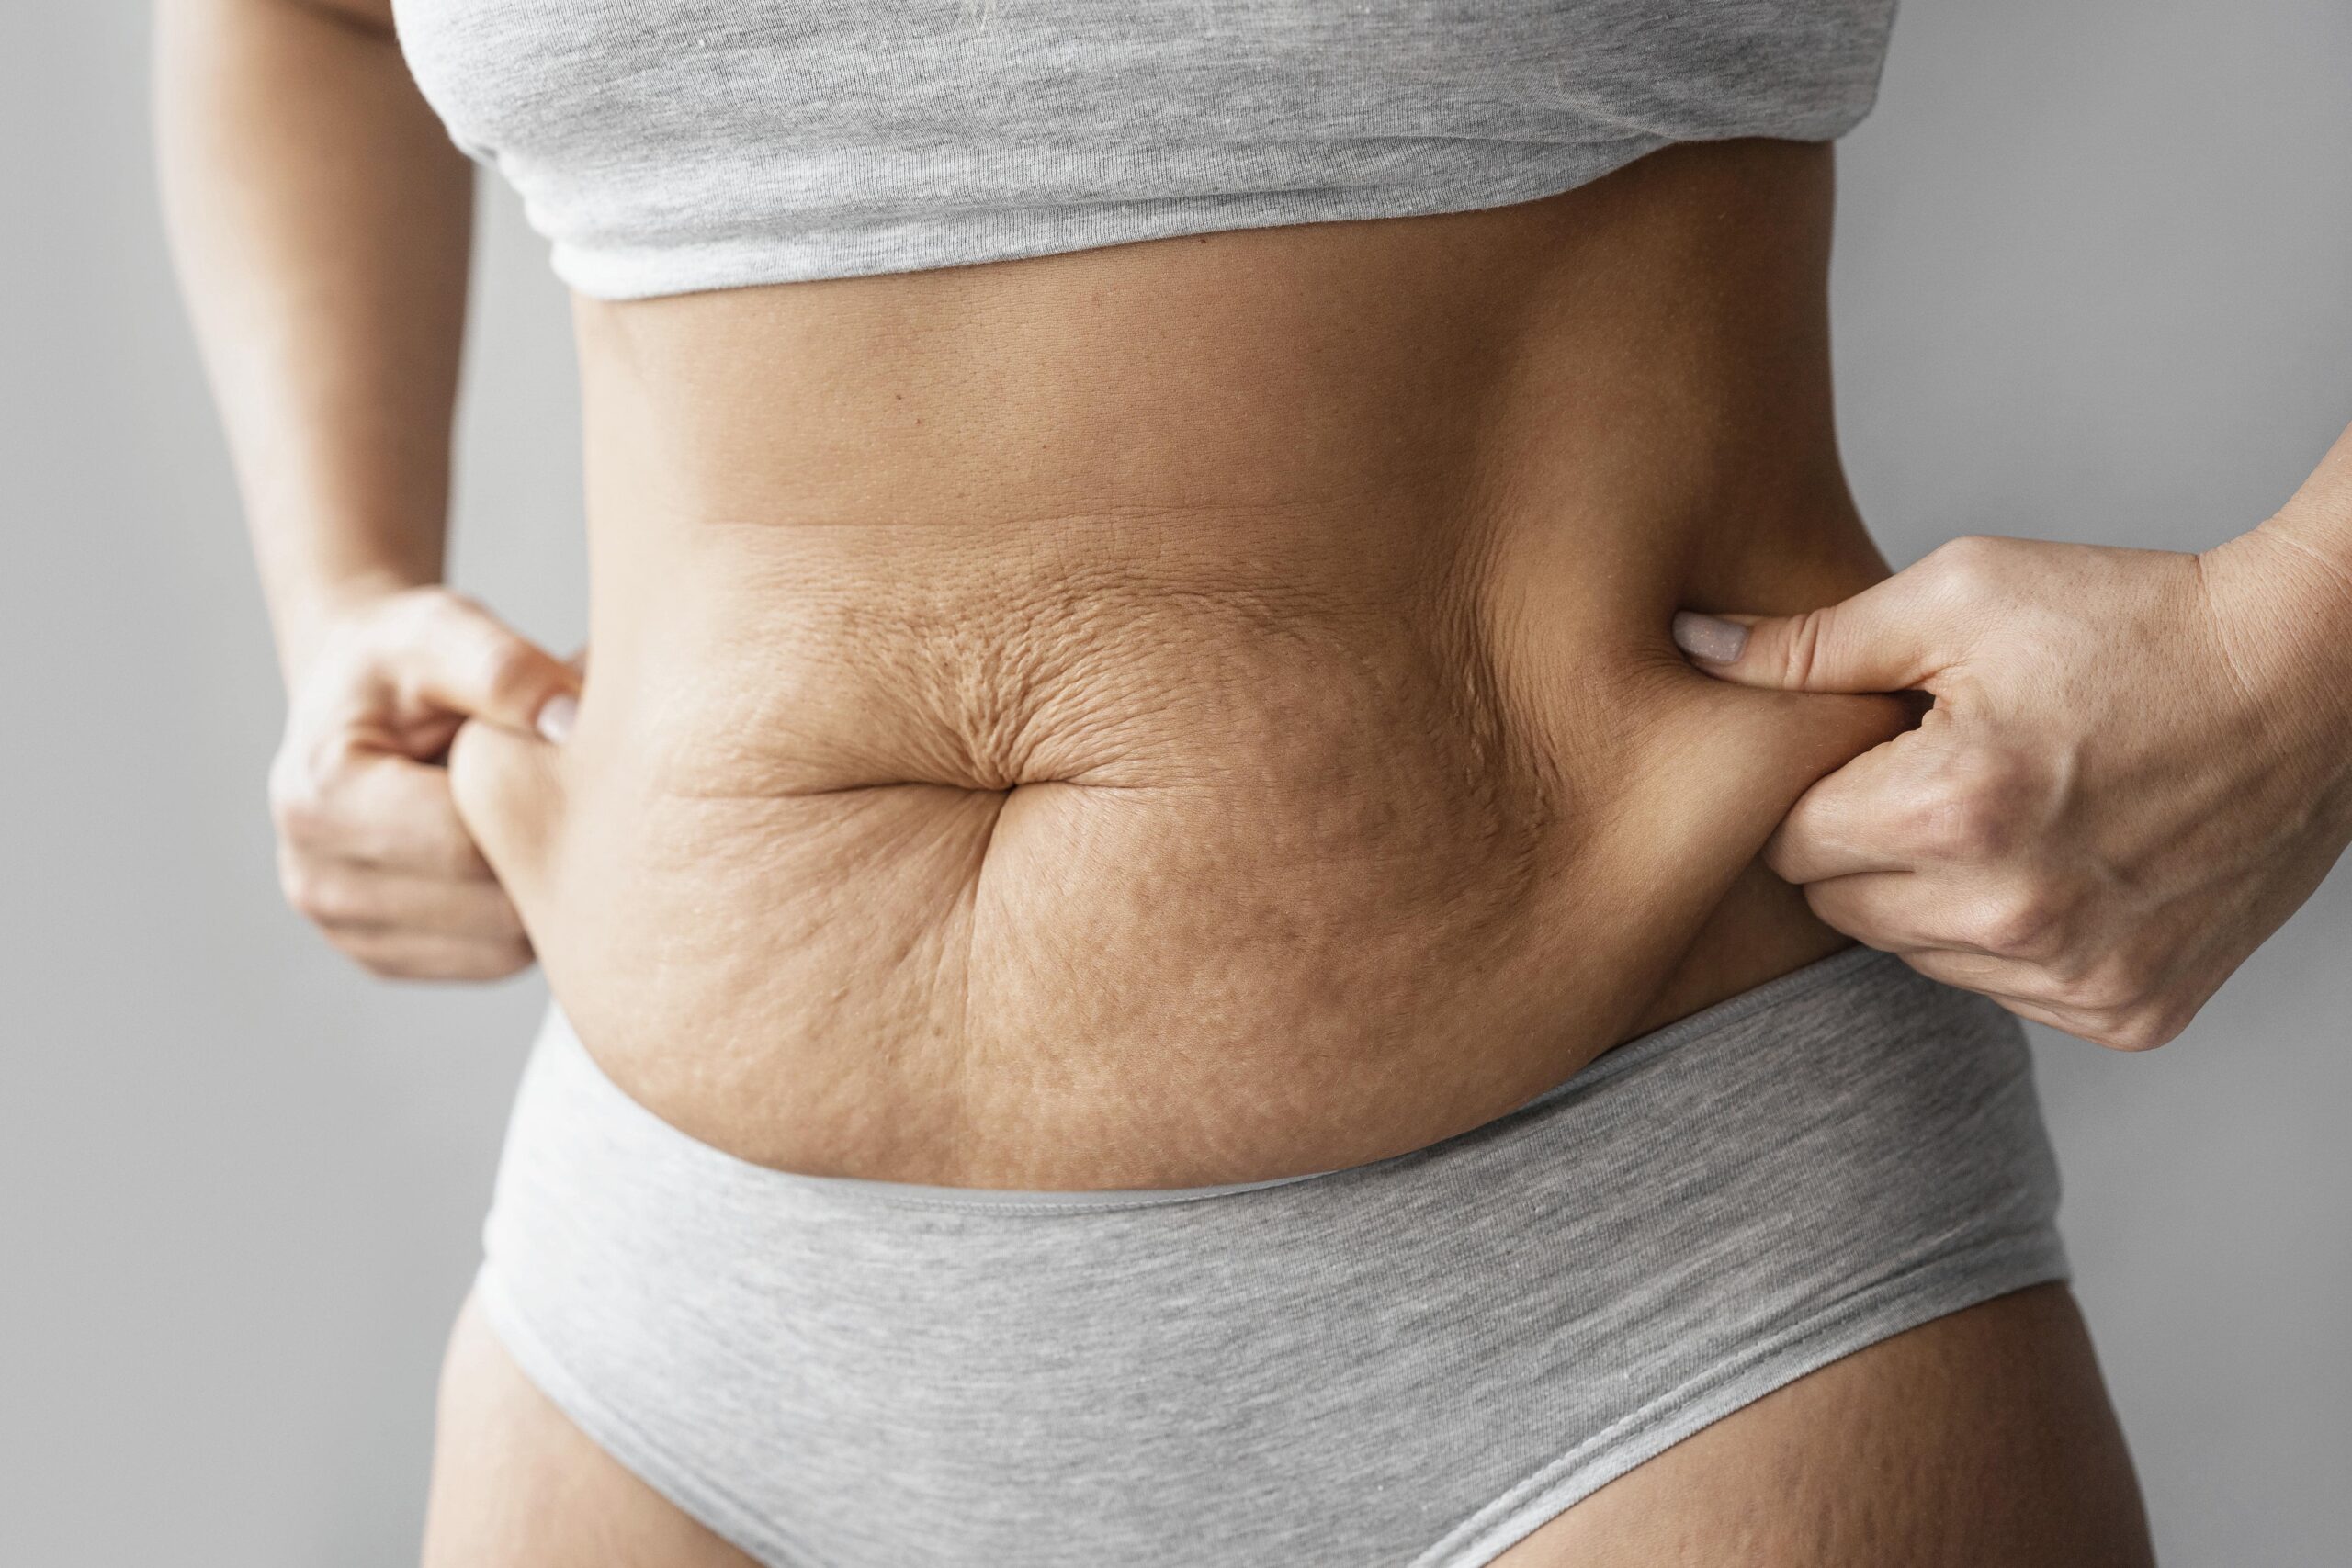 What is a good candidate for fat freezing?